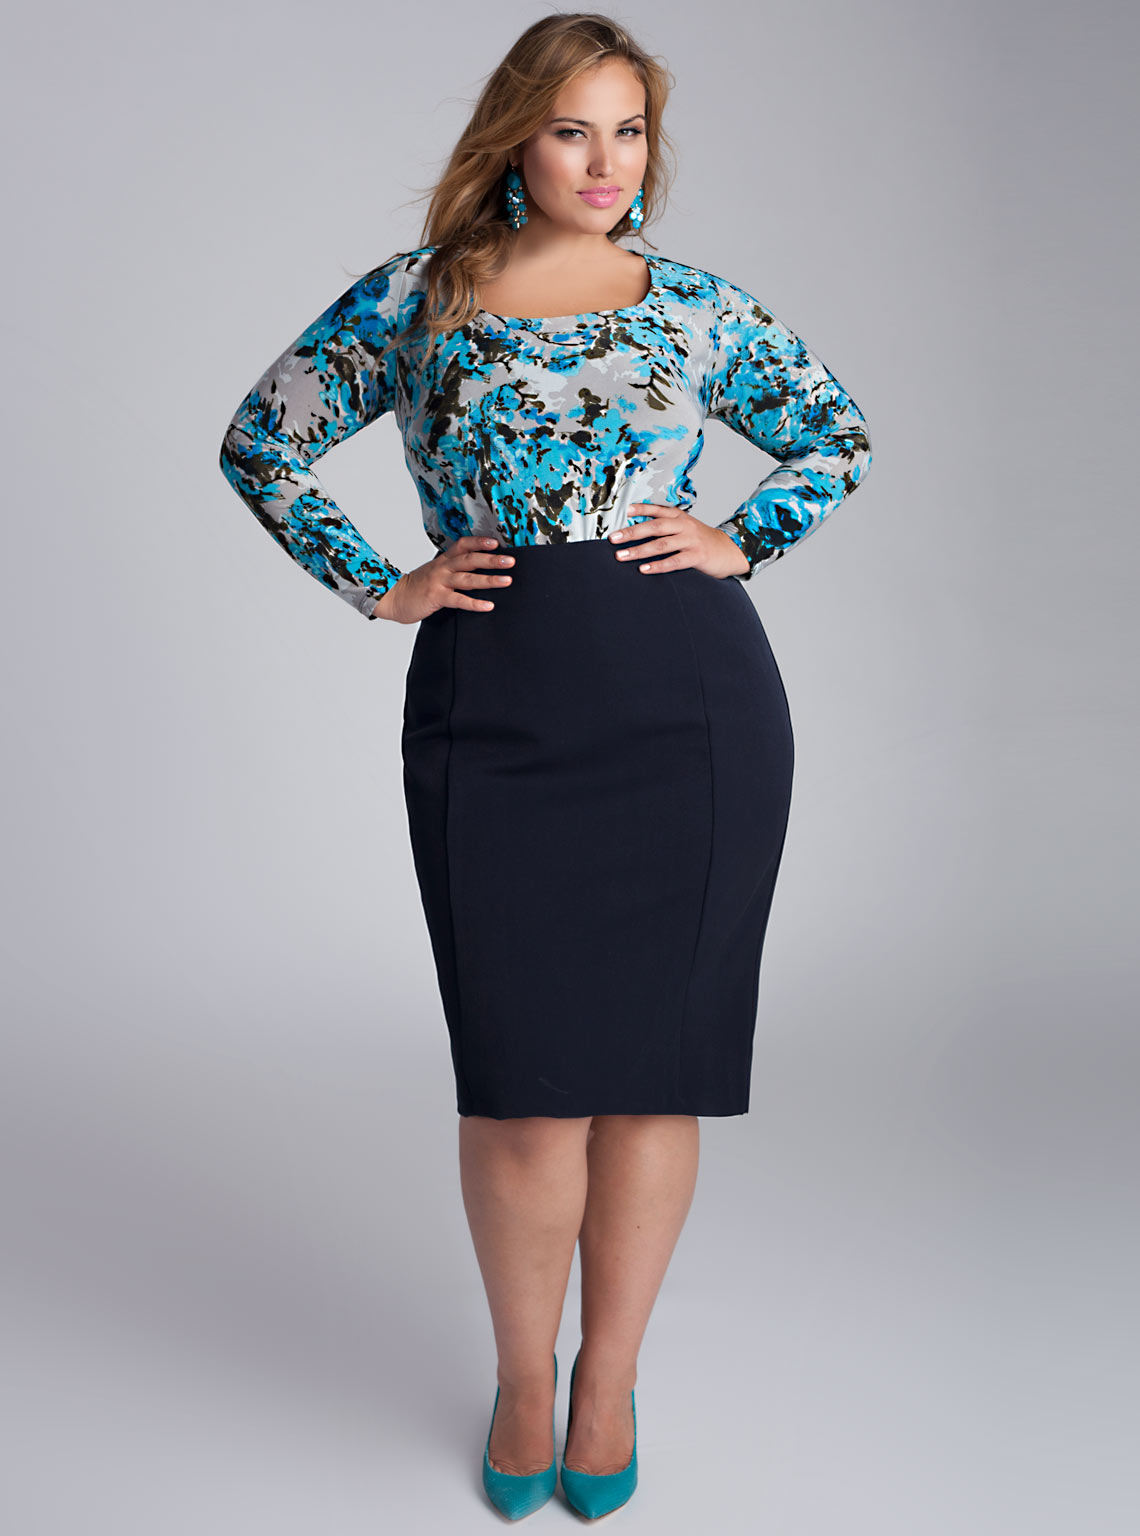 Plus Size Skirts: Look Perfect